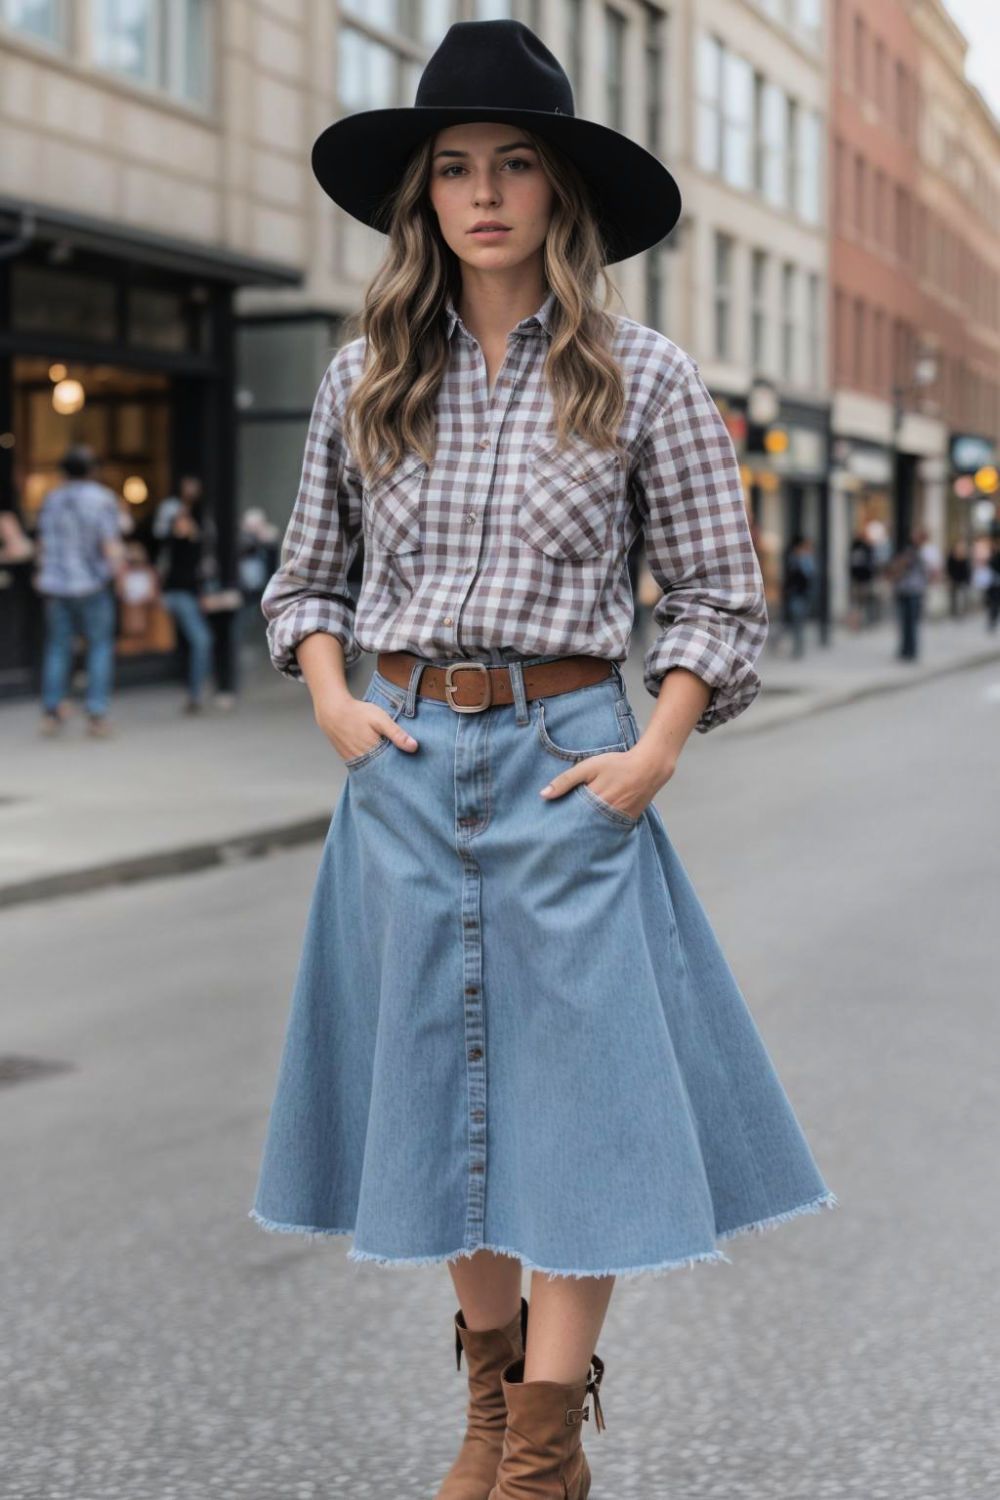 classic denim and plaid for cowgirl